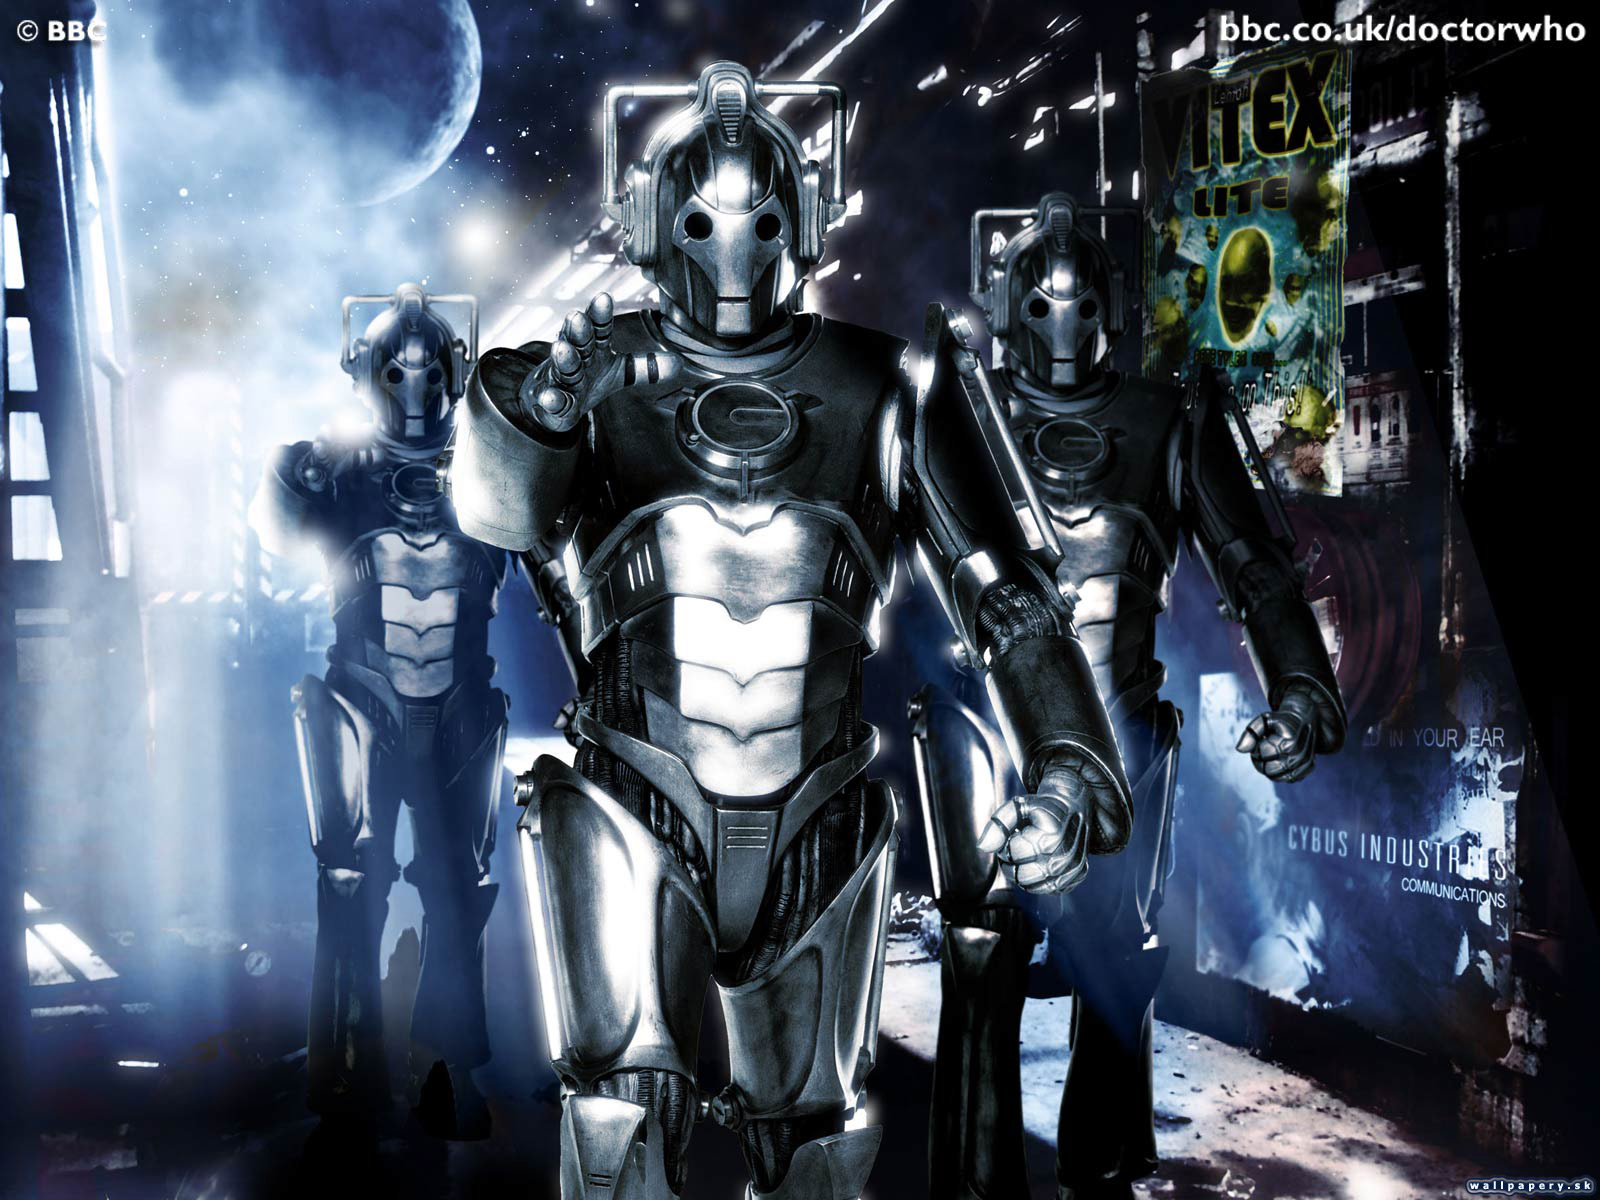 Doctor Who: The Adventure Games - Blood of the Cybermen - wallpaper 5